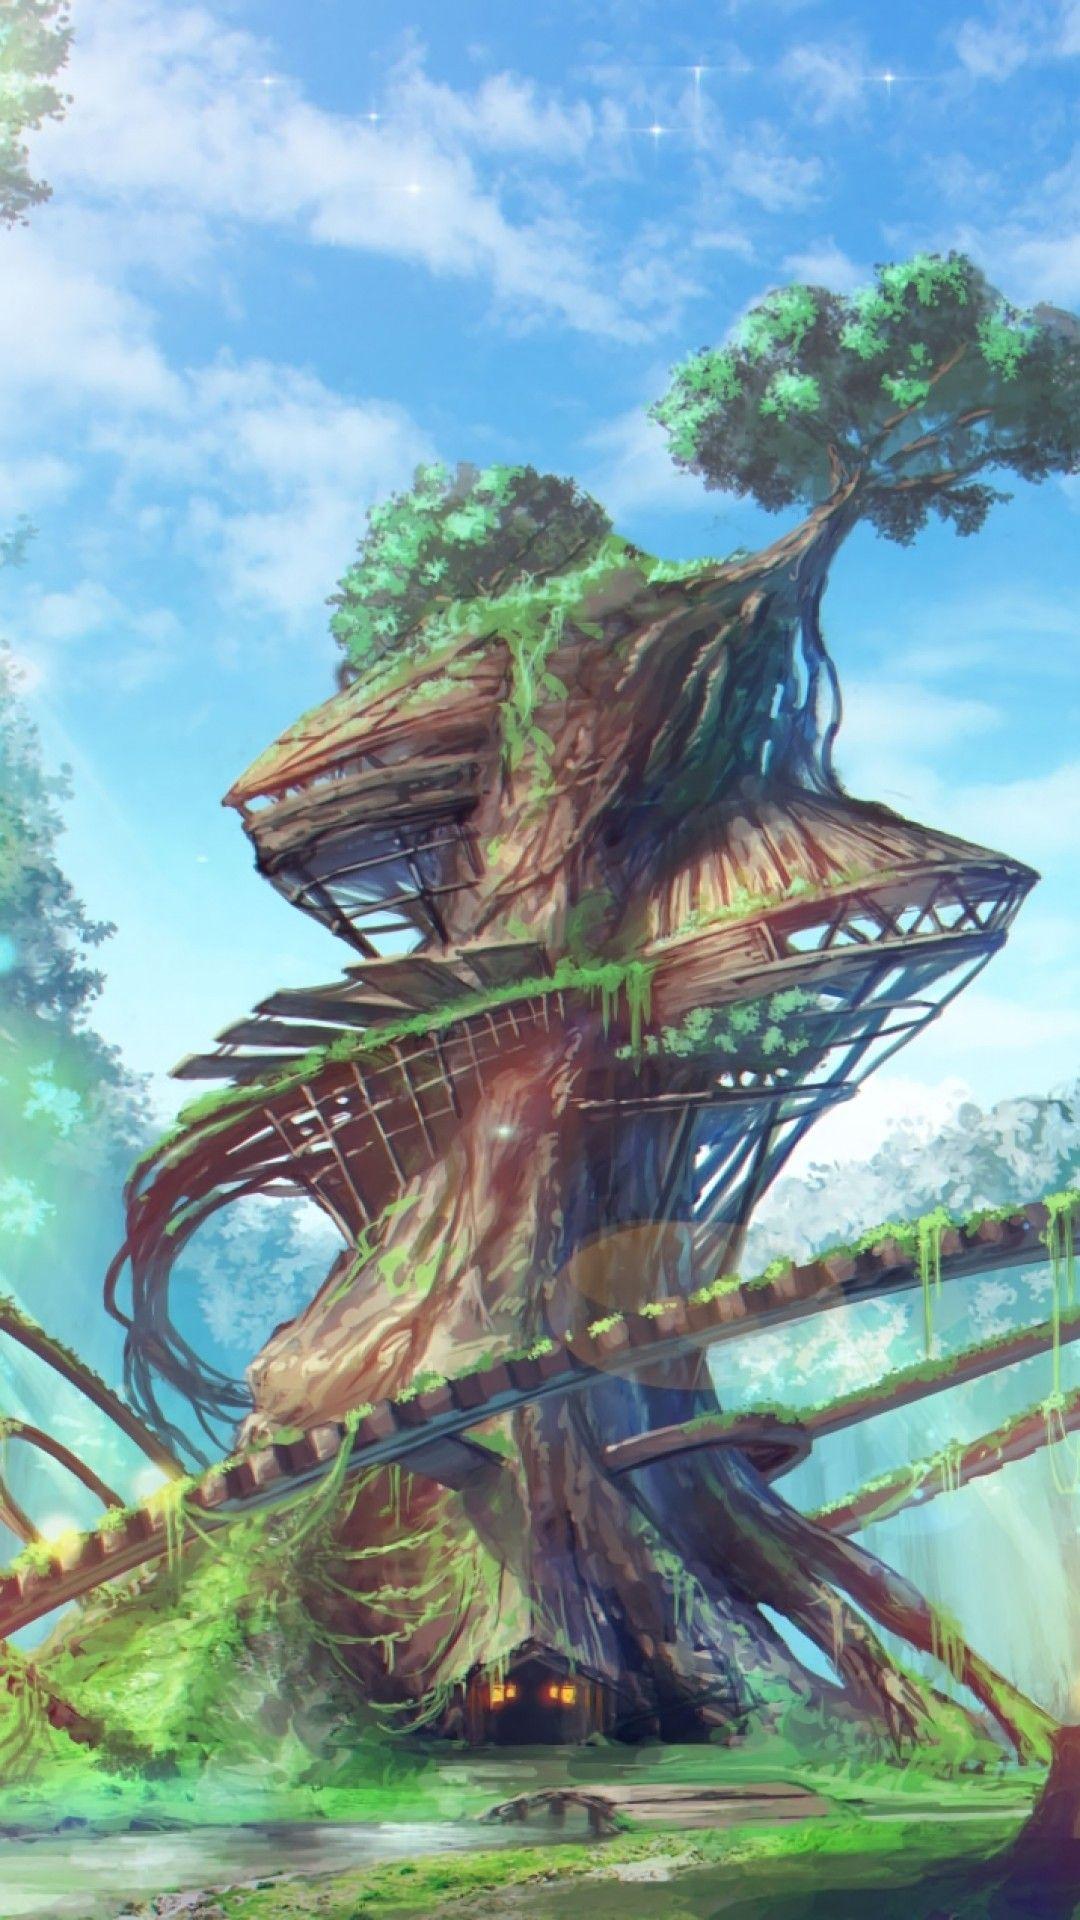 Download 1080x1920 Fantasy Forest, Tree House, Sunlight, Clouds